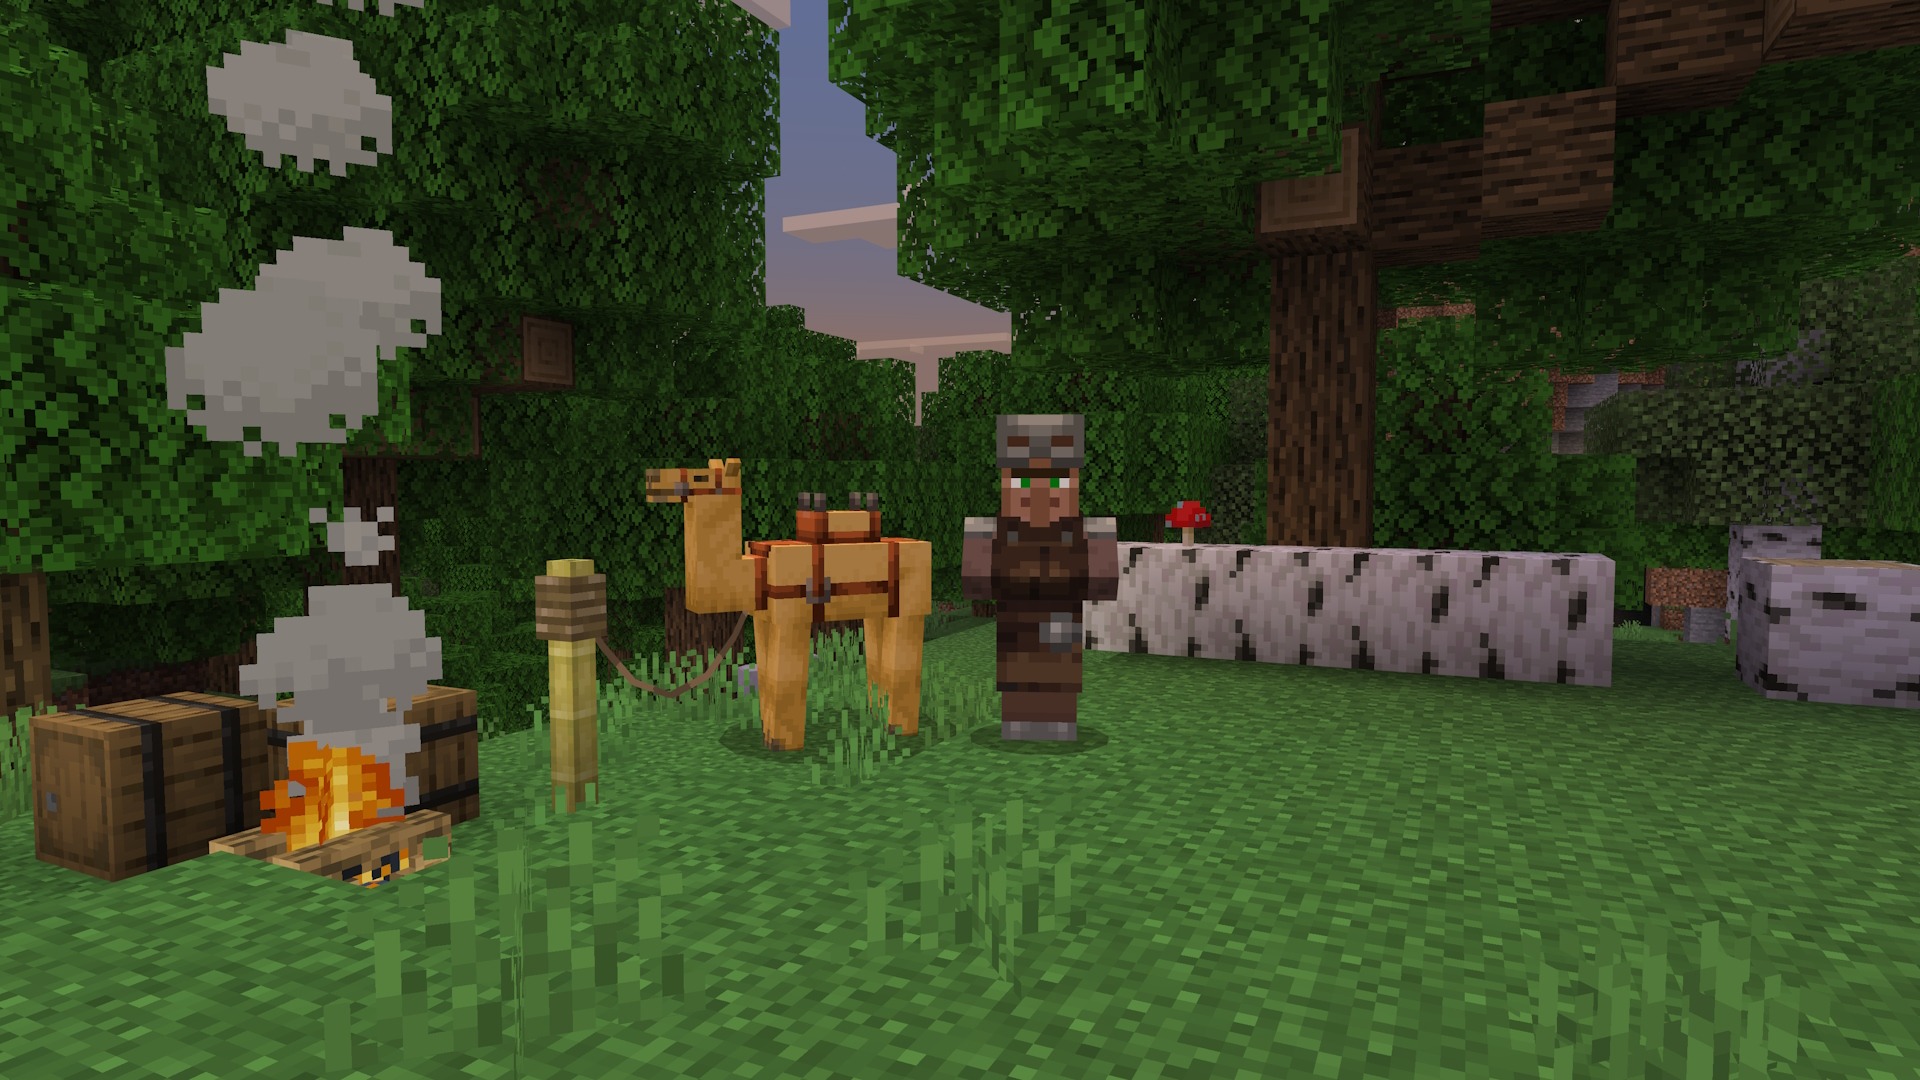 A Minecraft screenshot of a villager in a forest, with a fallen birch tree with a mushroom on it. There is also a camel in the background, leashed to a fence, with a campfire and some barrels nearby.